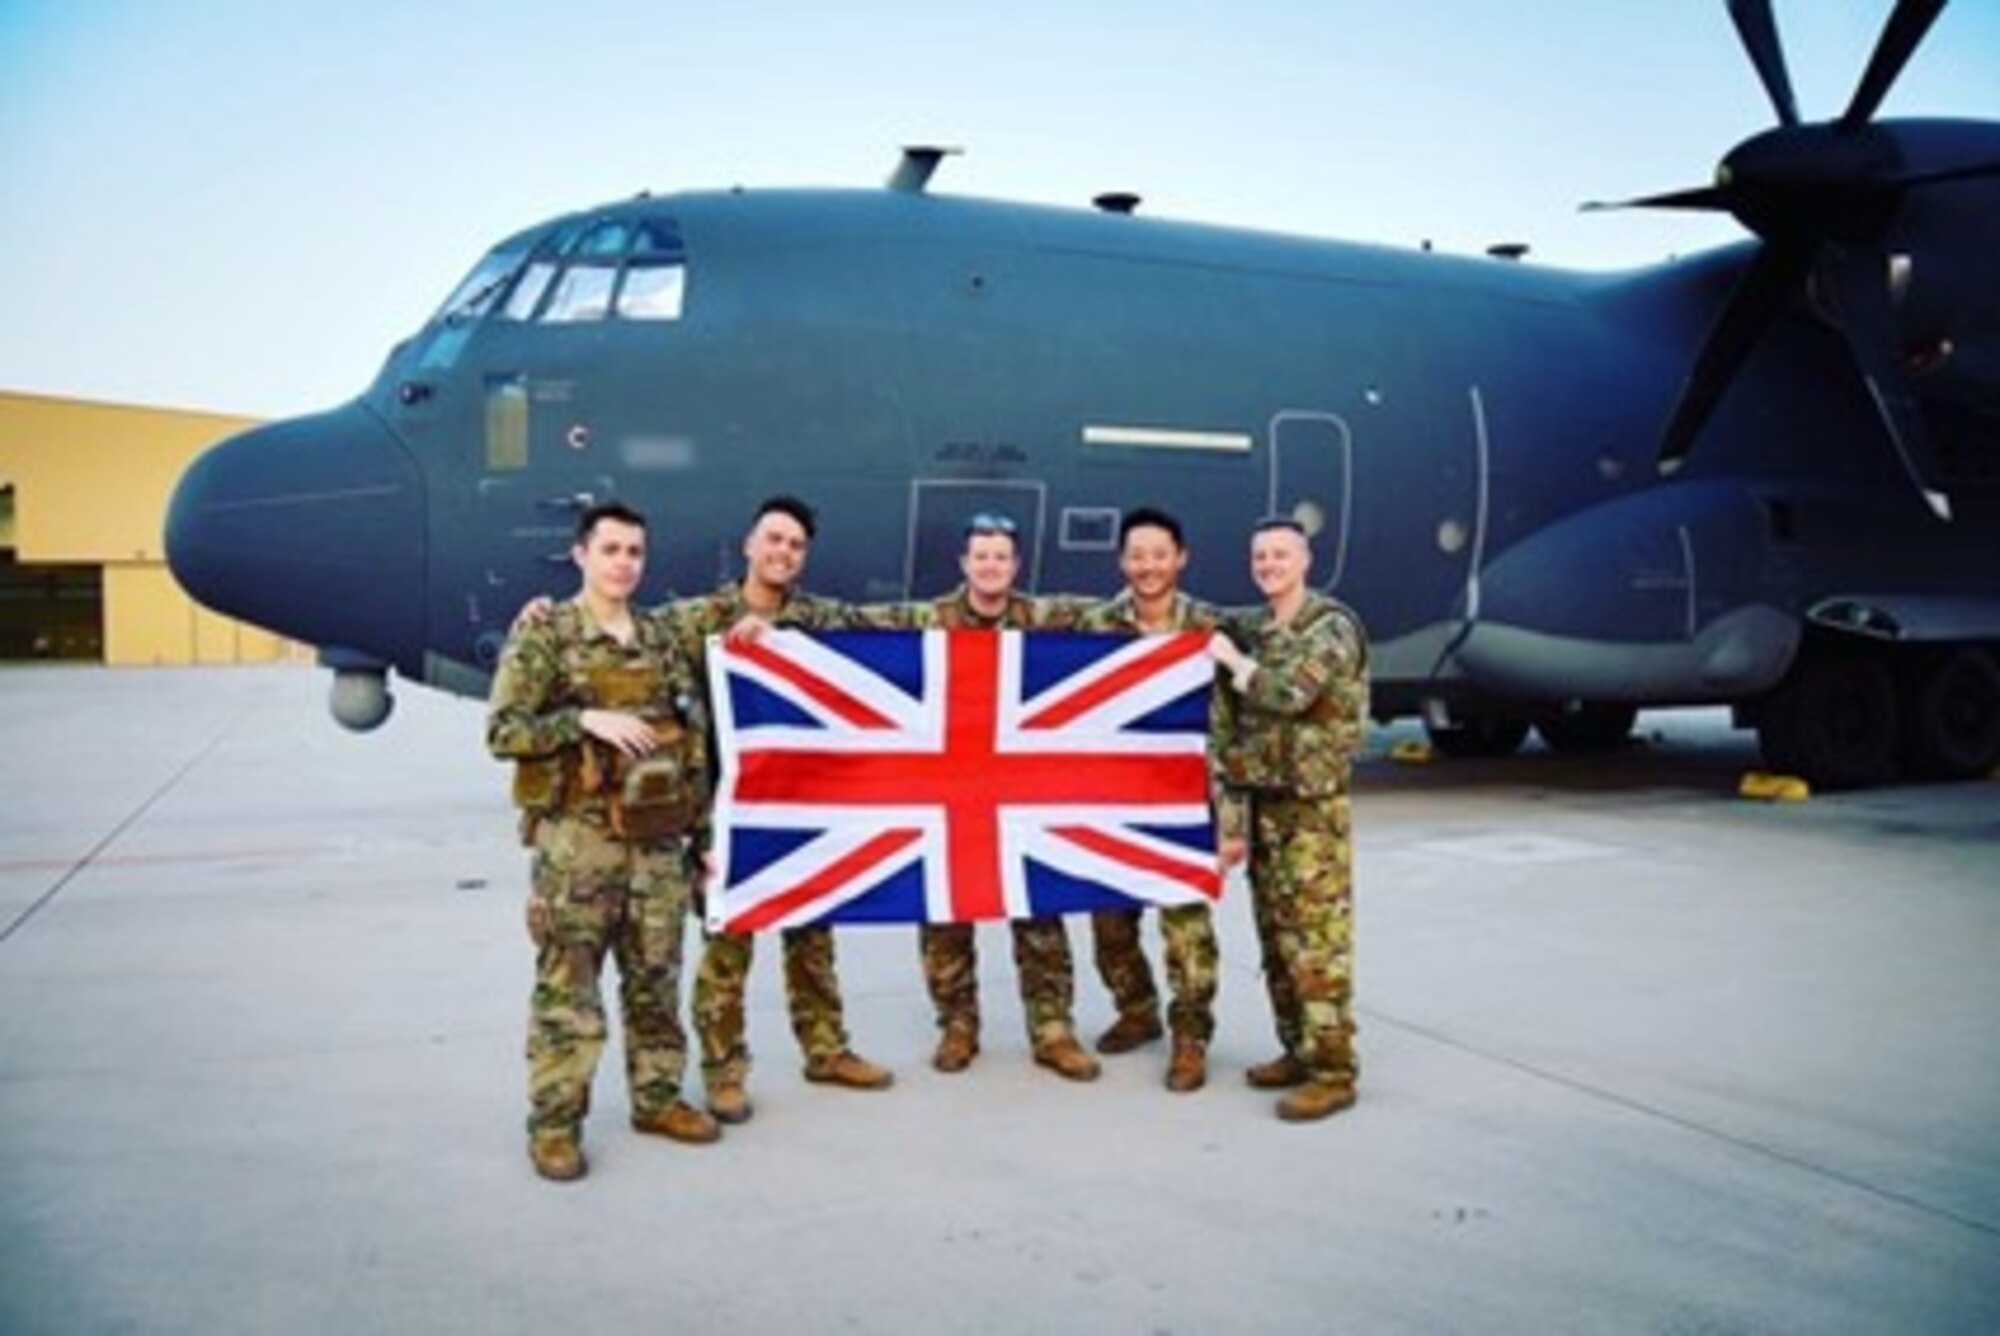 A group of five individuals in military uniform pose with a U.K. flag in front of a military aircraft.